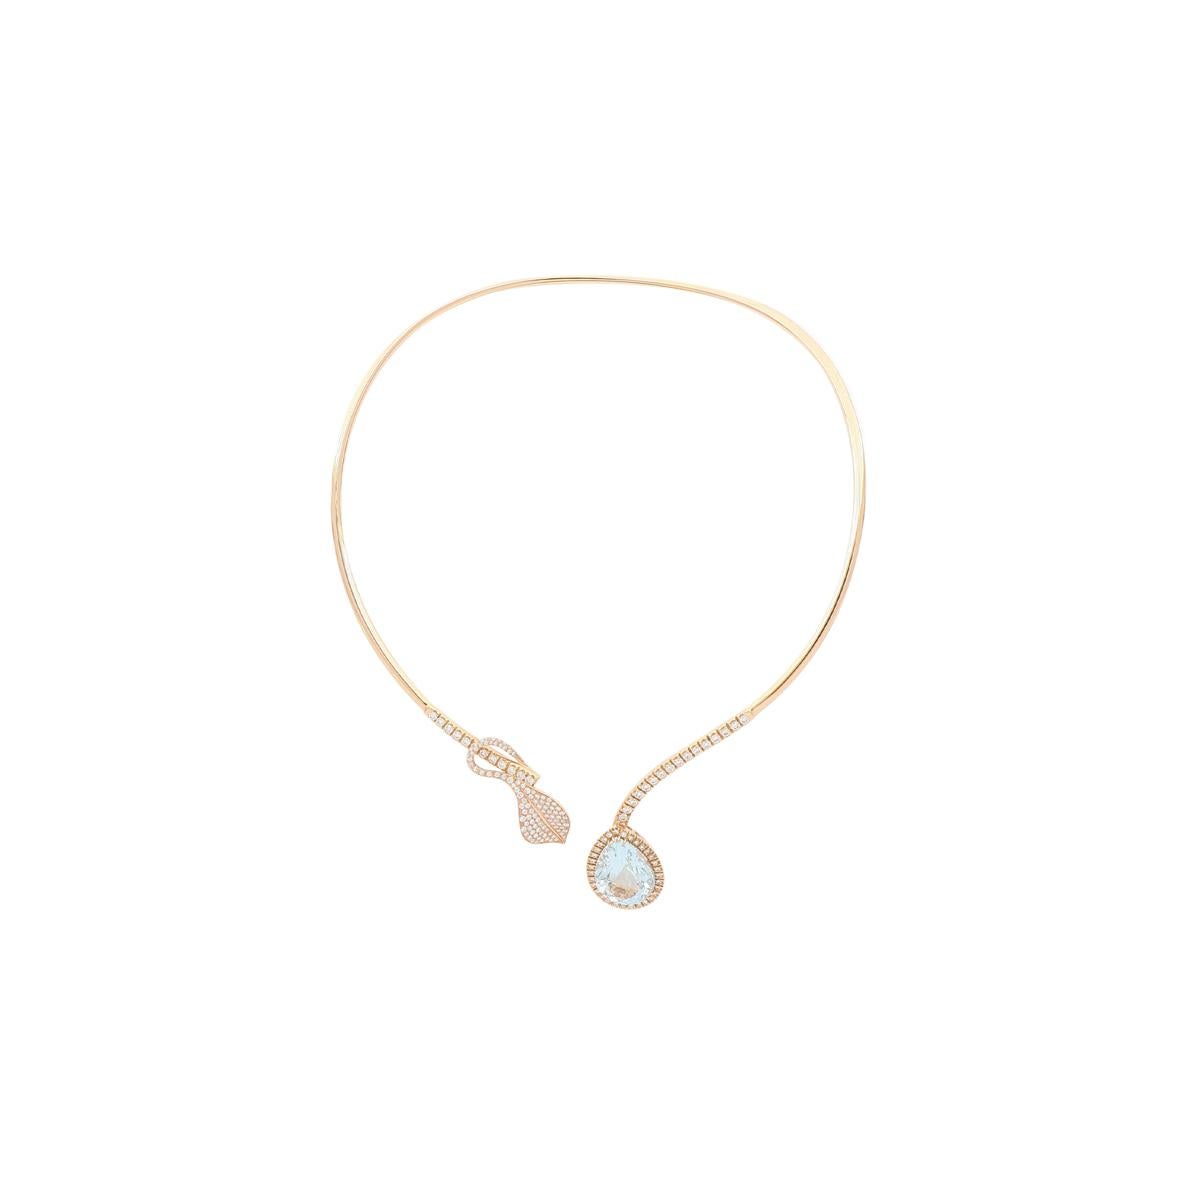 This 18 karat rose gold adjustable open collar necklace features a diamond-encrusted leaf on one end and a pear-cut aquamarine with a diamond halo on the other end. Being a March birthstone, aquamarine represents the transformation and rebirth of